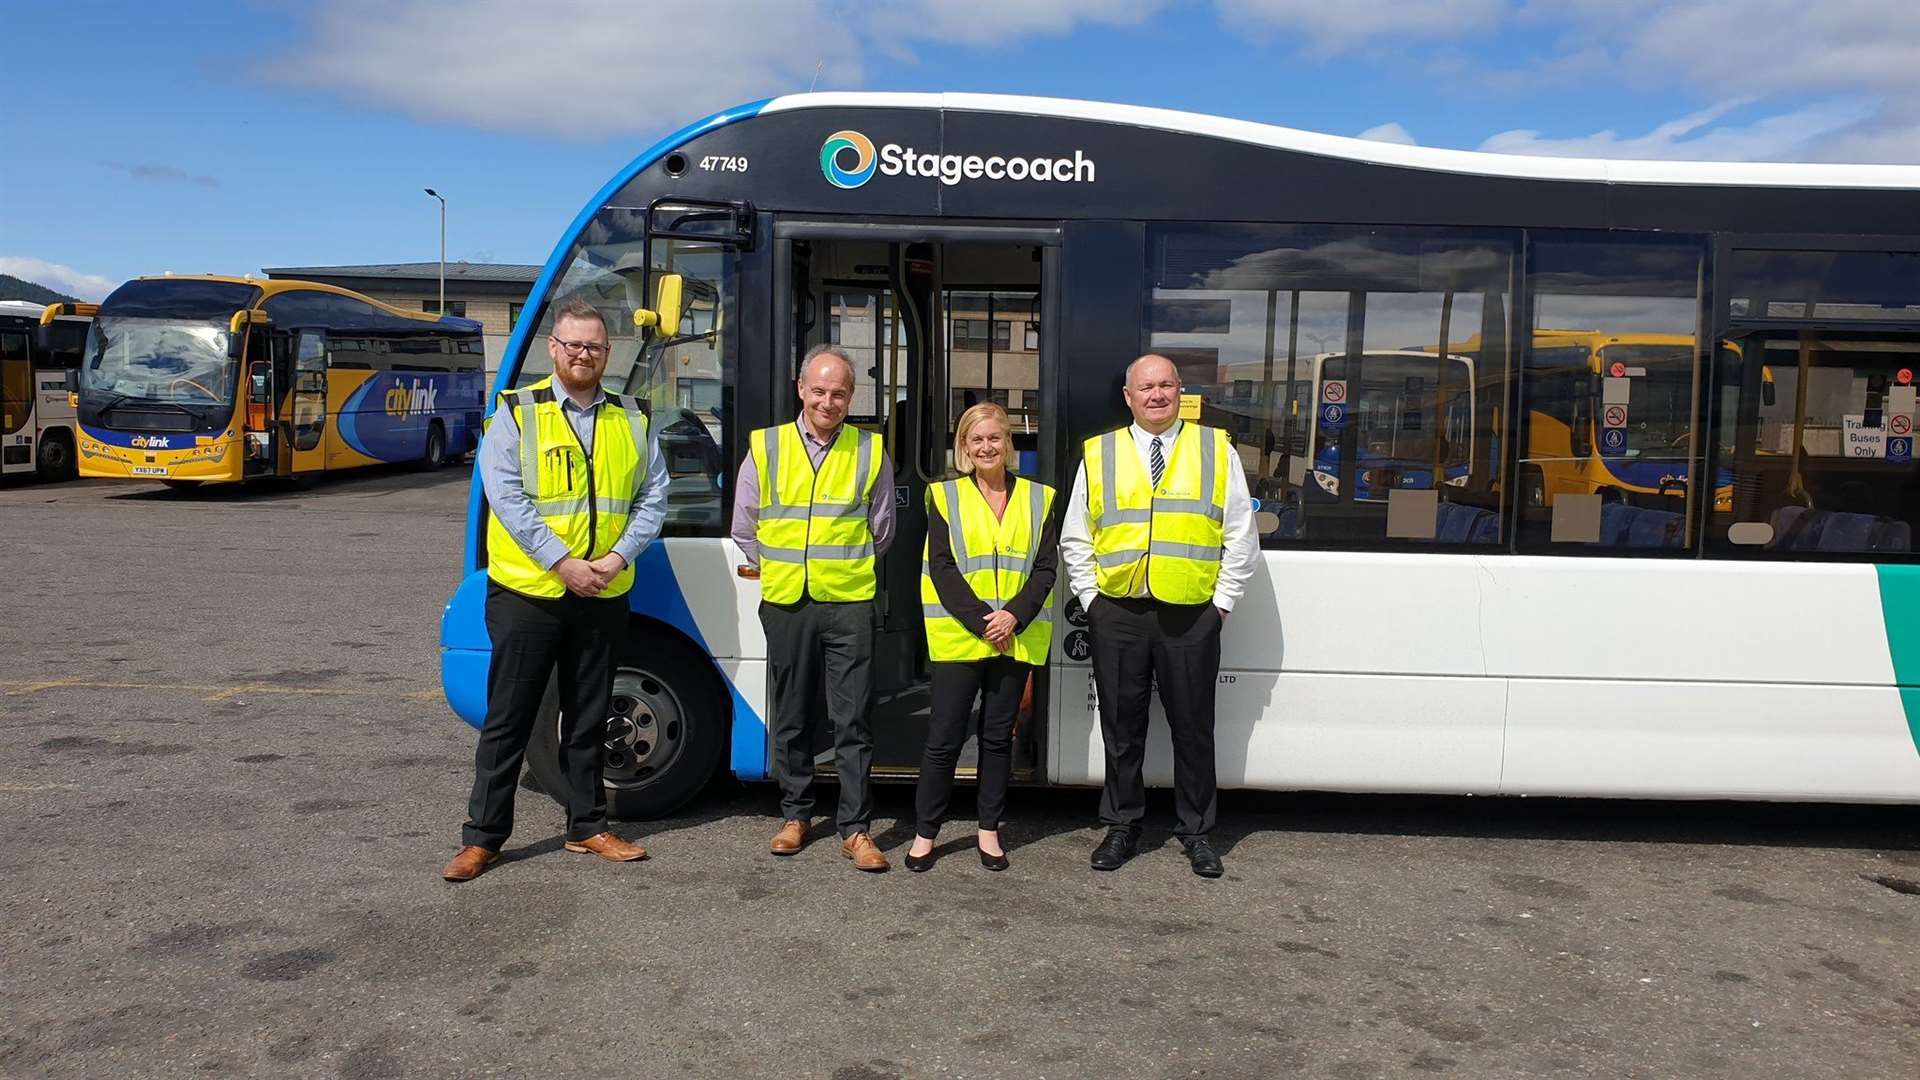 Cllr Jackie hendry during her recent visit to Stagecoach.